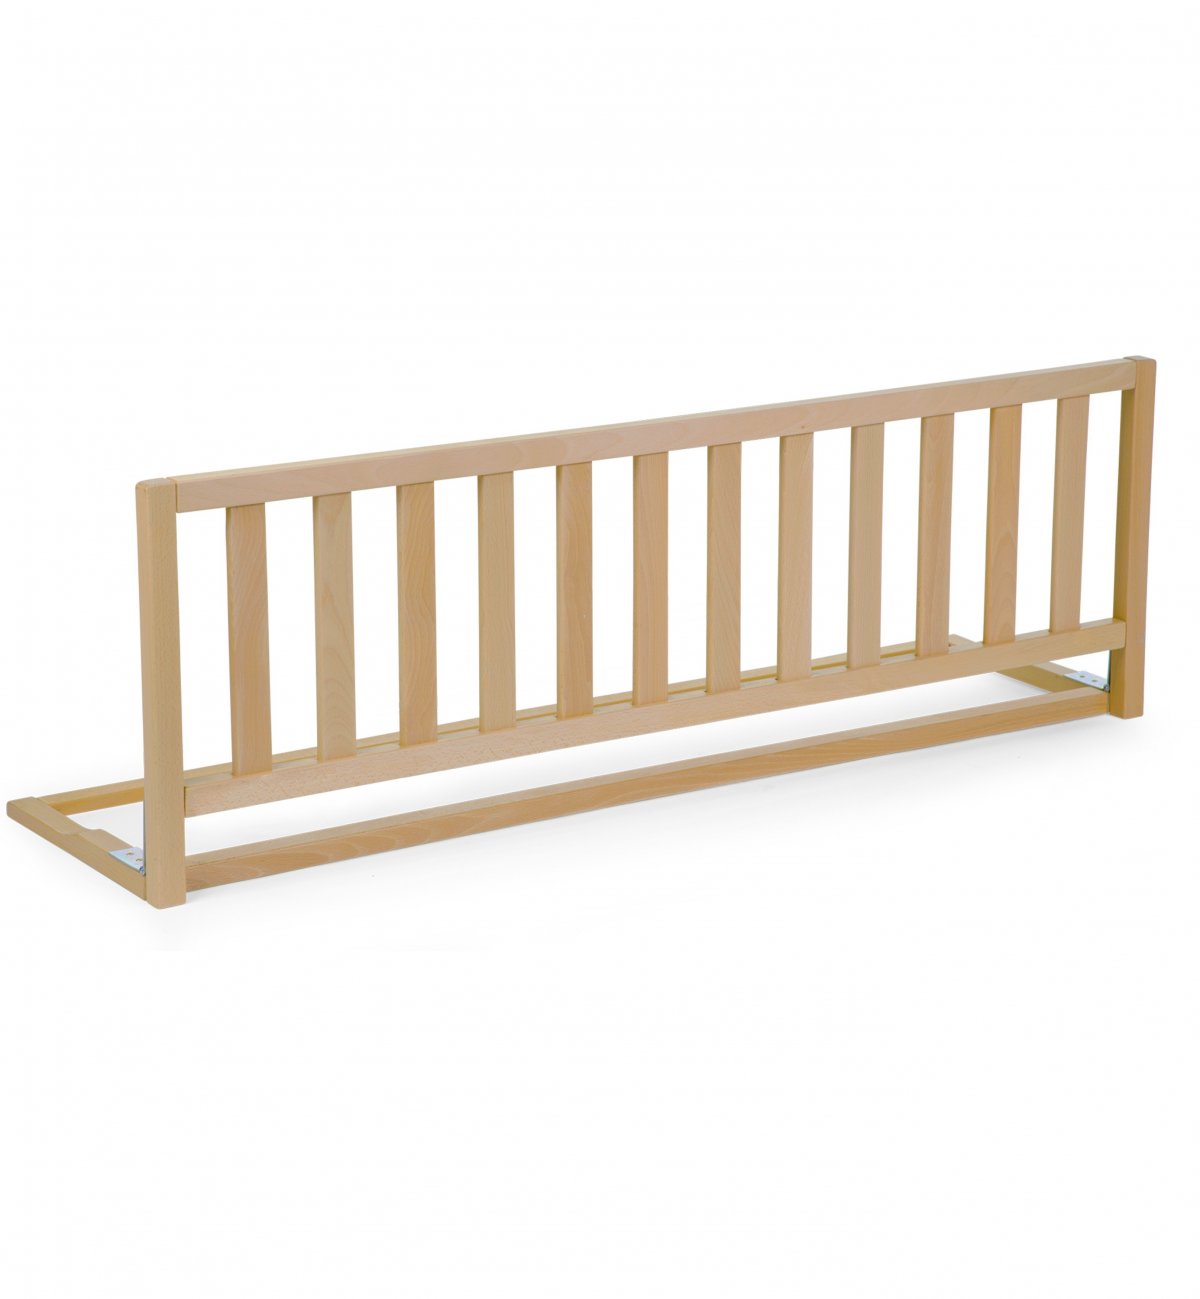 Kadolis natural beech bed fall protection barrier for children